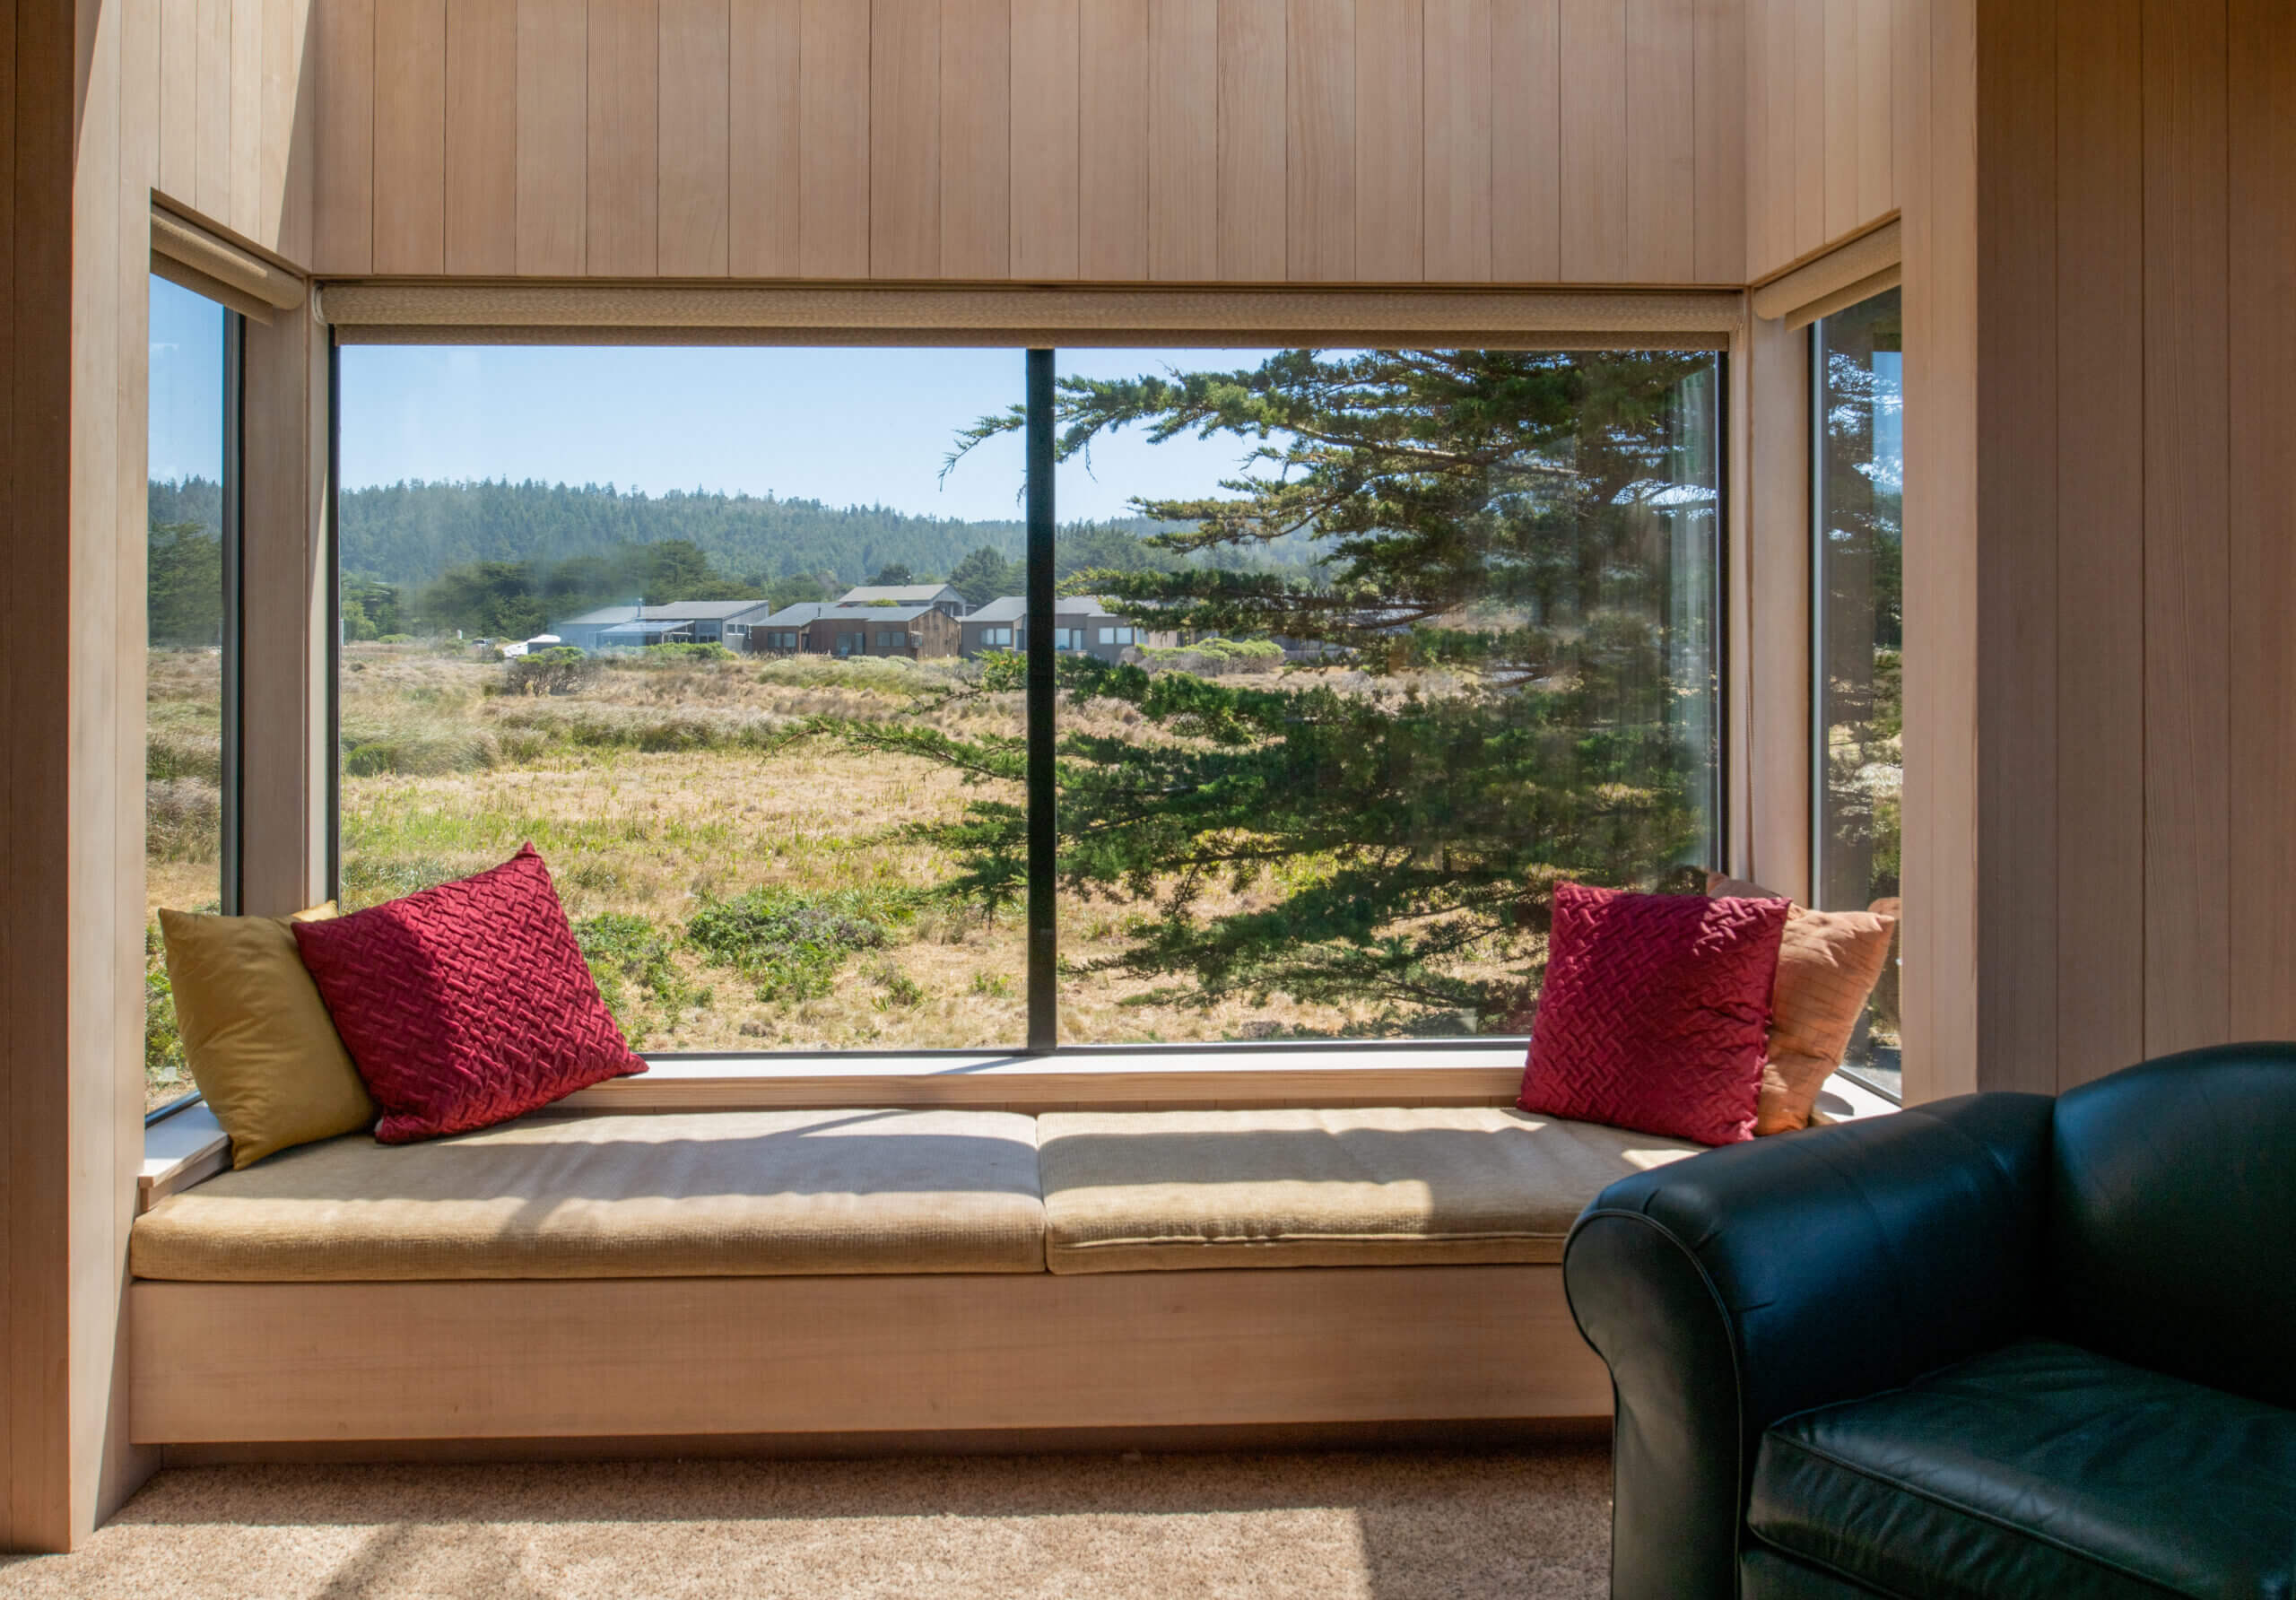 Piper's Dream window seat, large window with view of meadow